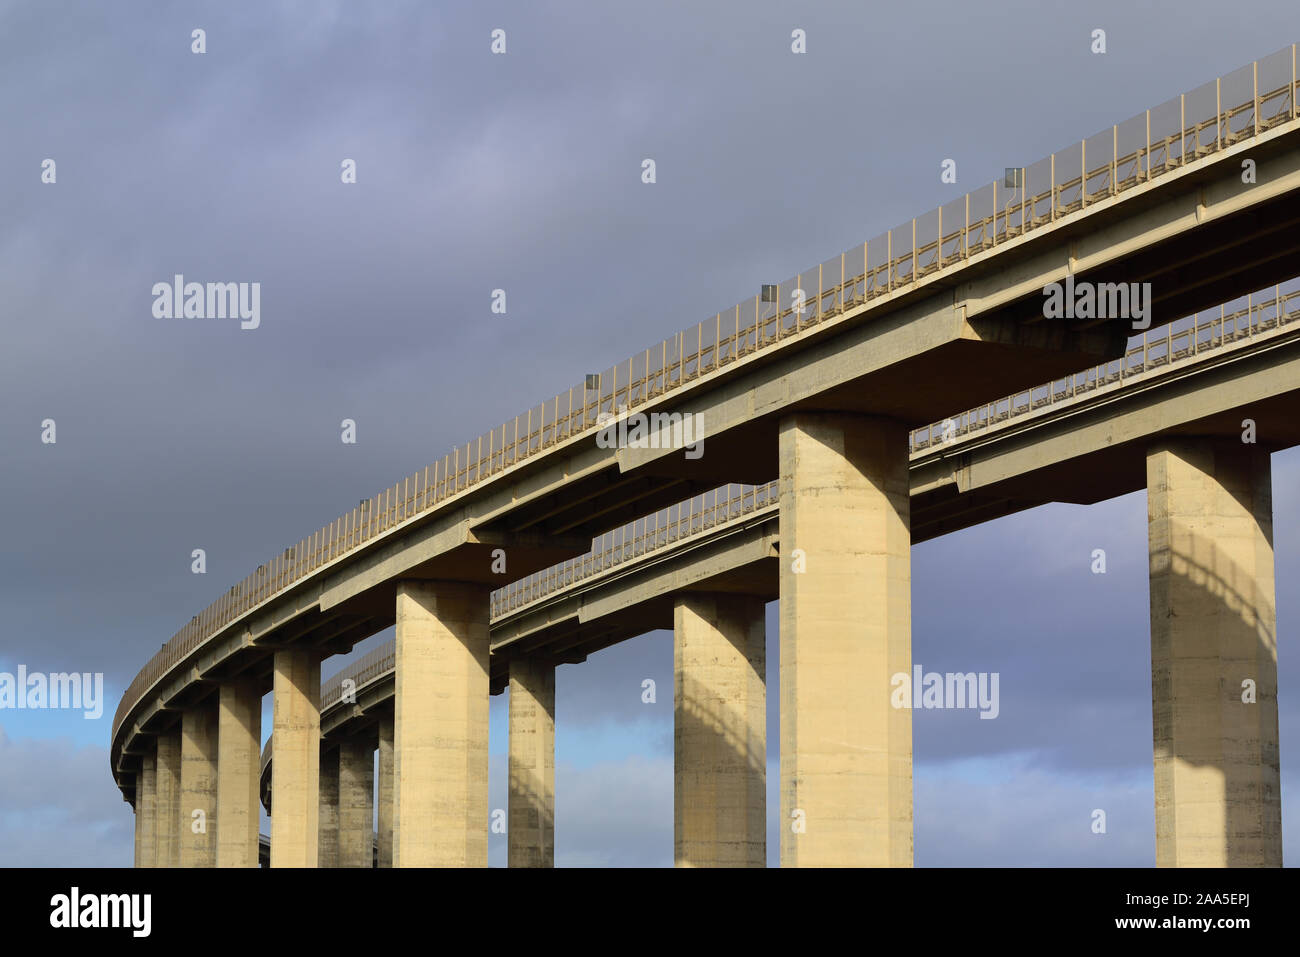 Close-up of a large concrete highway bridge in front of dark clouds in Italy Stock Photo